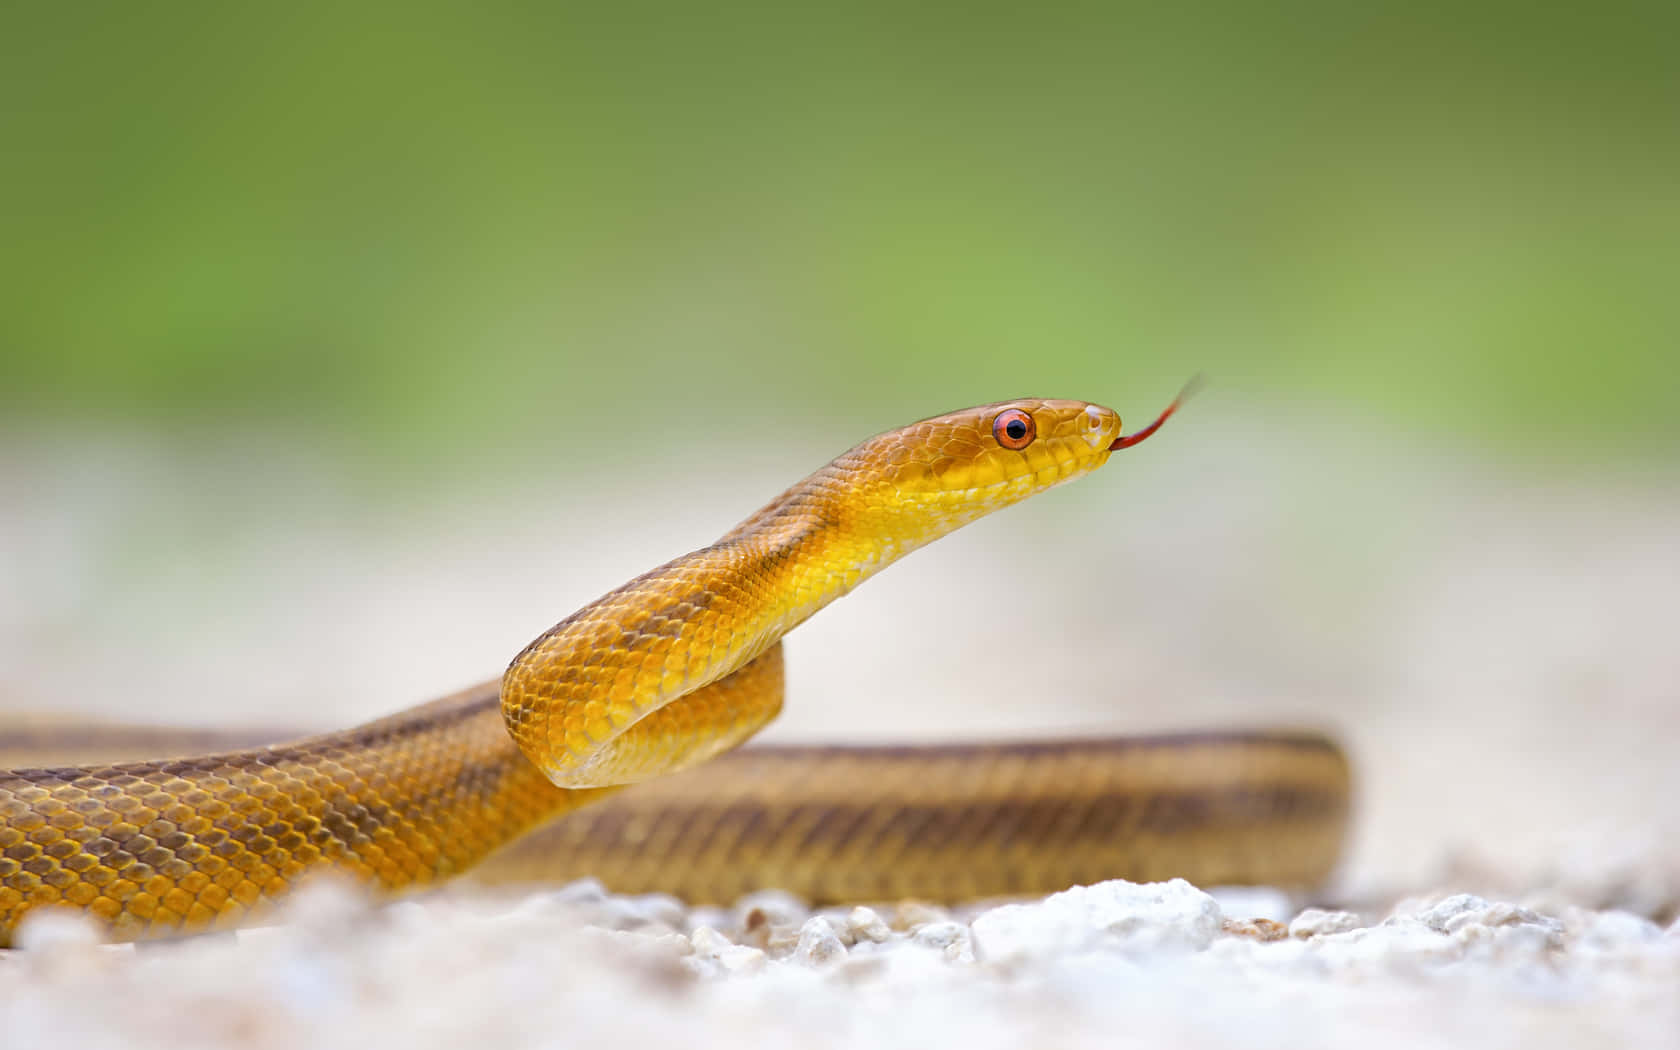 Slithering Brown Snake in the Wild Wallpaper